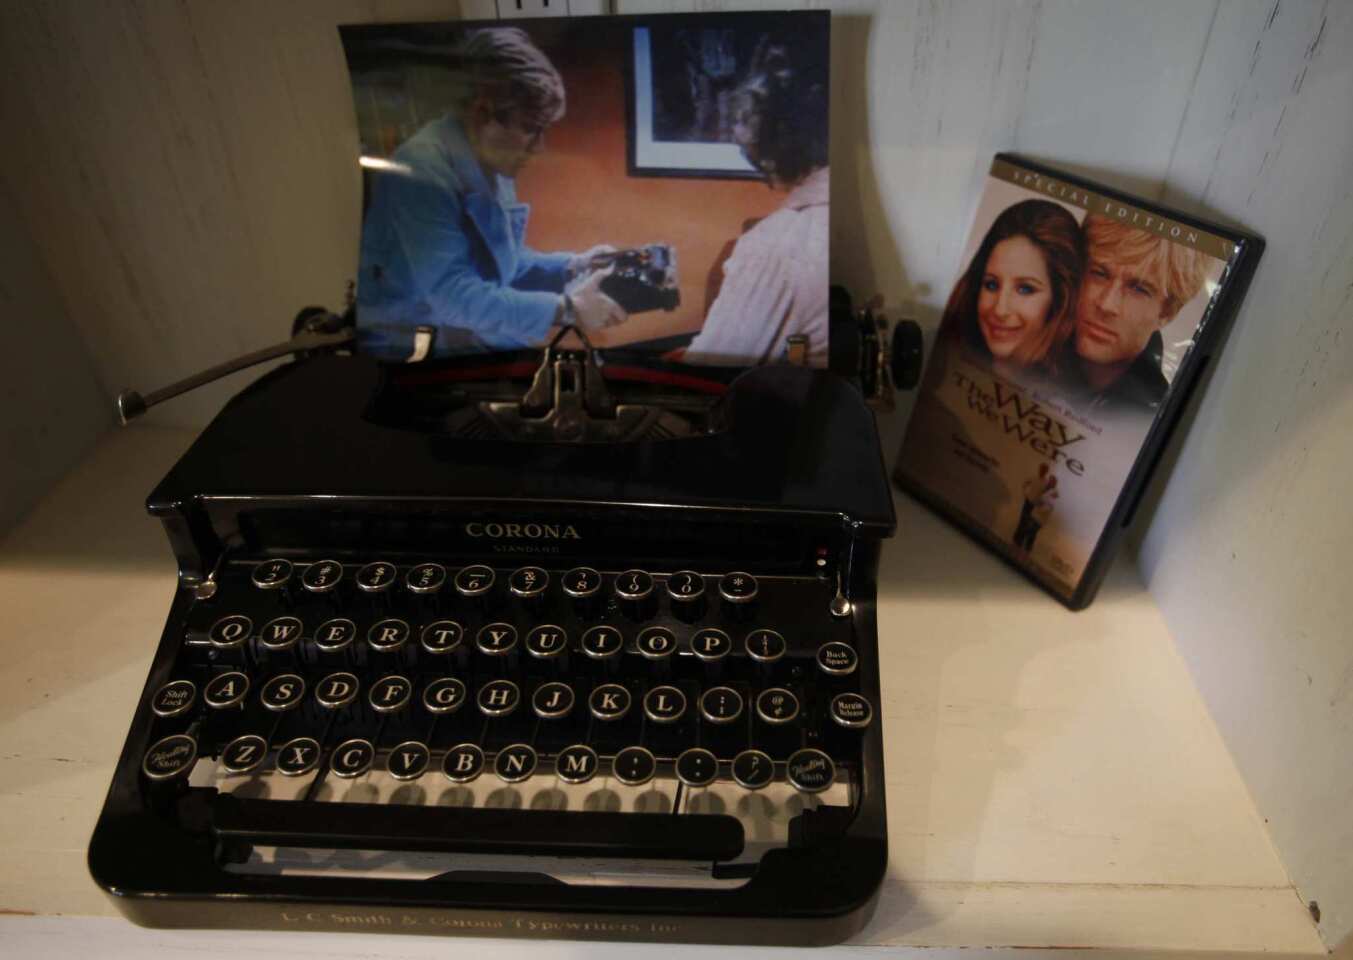 Among Steve Soboroff's finds is a movie prop used in the 1973 film "The Way We Were," starring Robert Redford as a novelist and screenwriter and Barbra Streisand as a political firebrand.